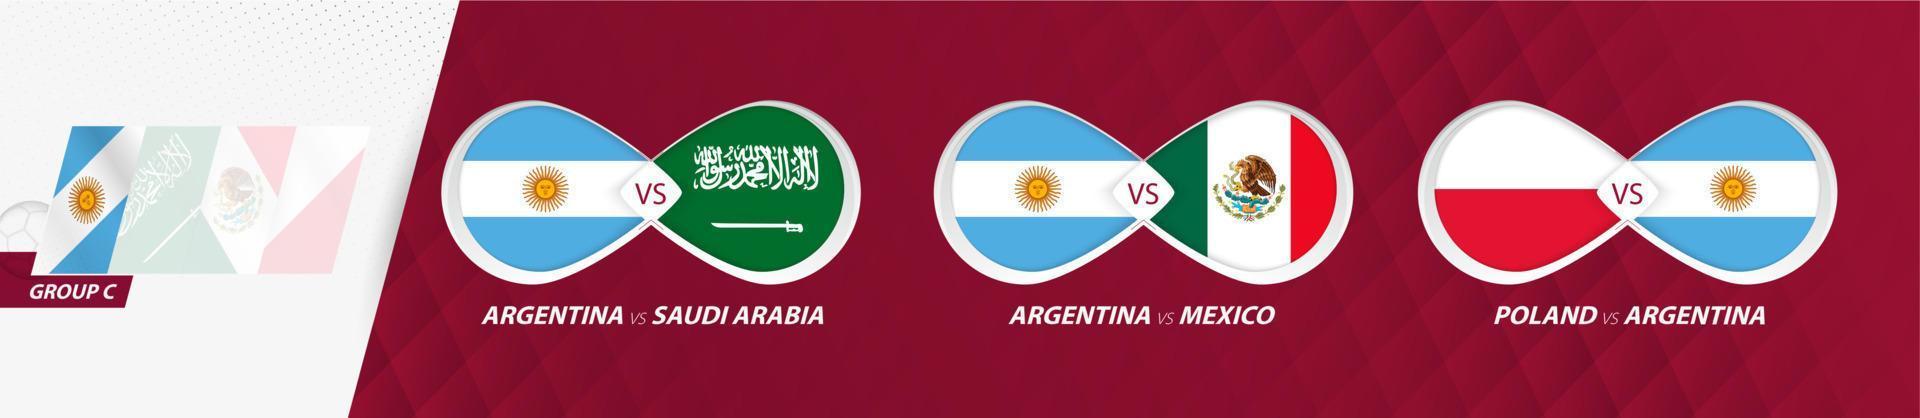 Argentina national team matches in group C, football competition 2022, all games icon in group stage. vector